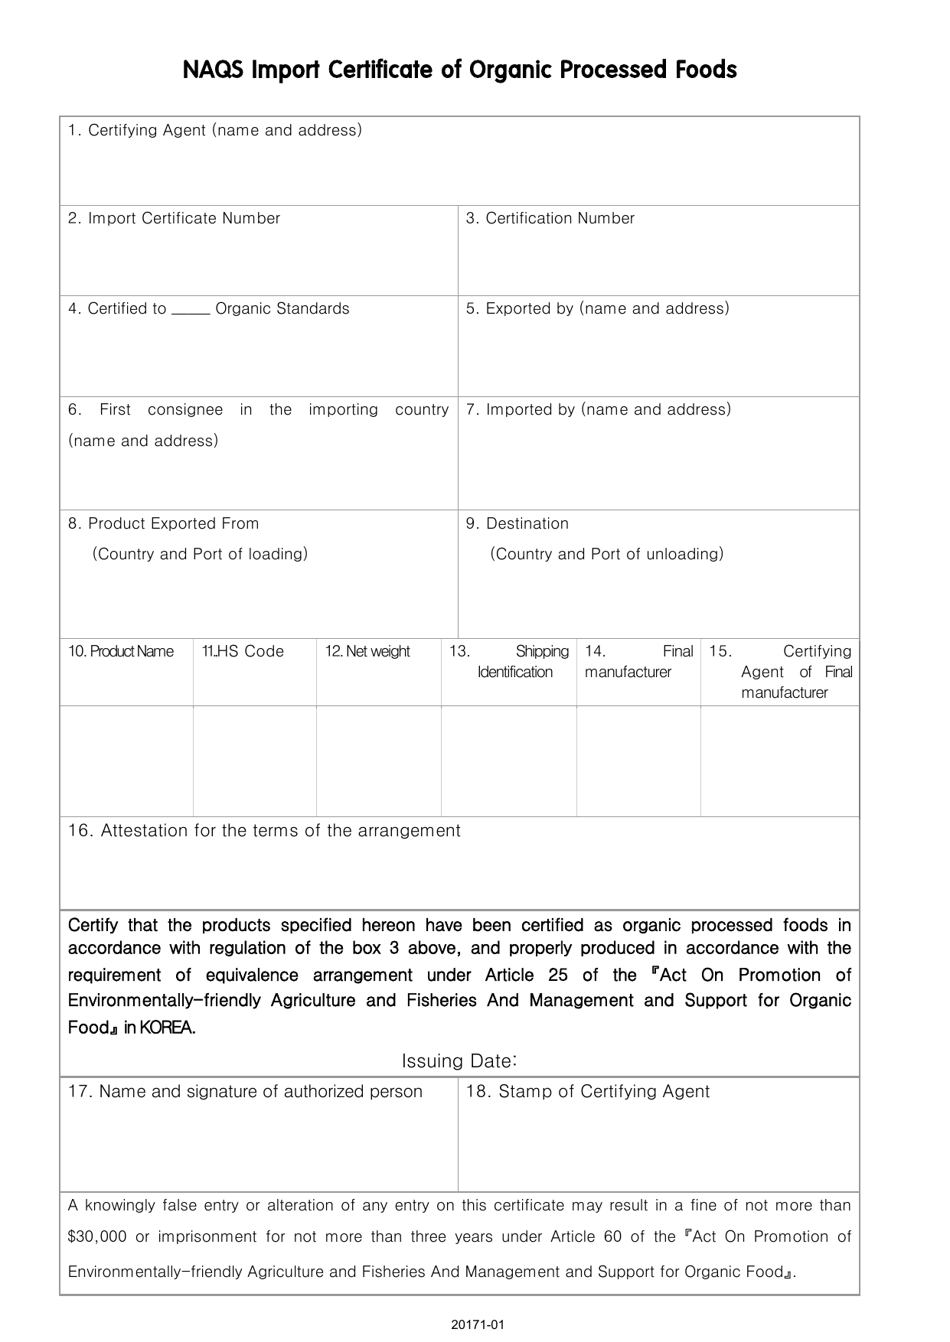 Naqs Import Certificate of Organic Processed Foods - Washington, Page 1